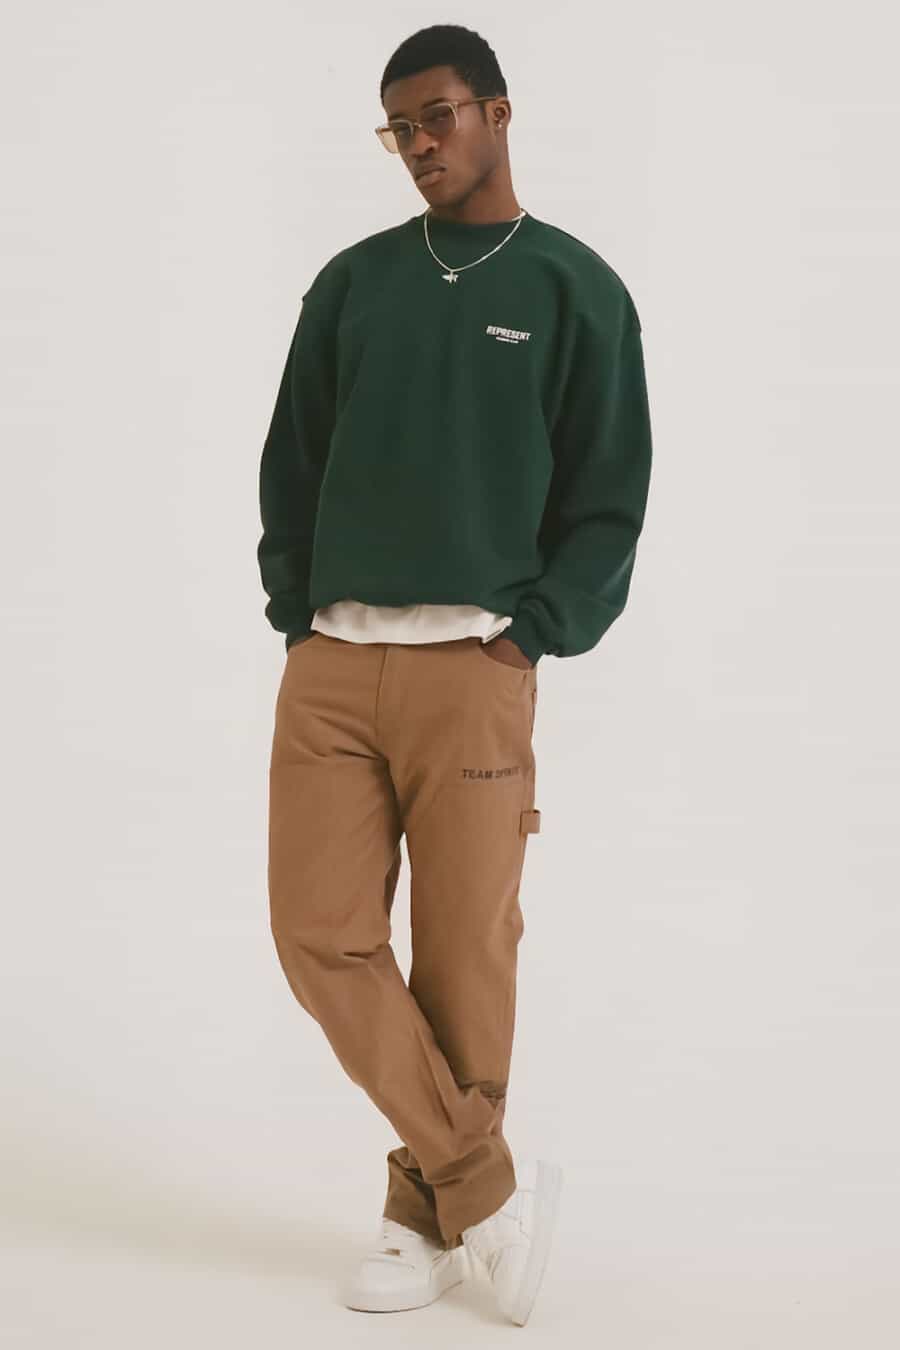 Men's khaki carpenter pants, white T-shirt, streetwear sweatshirt, chunky white sneakers and silver pendant chain necklace outfit